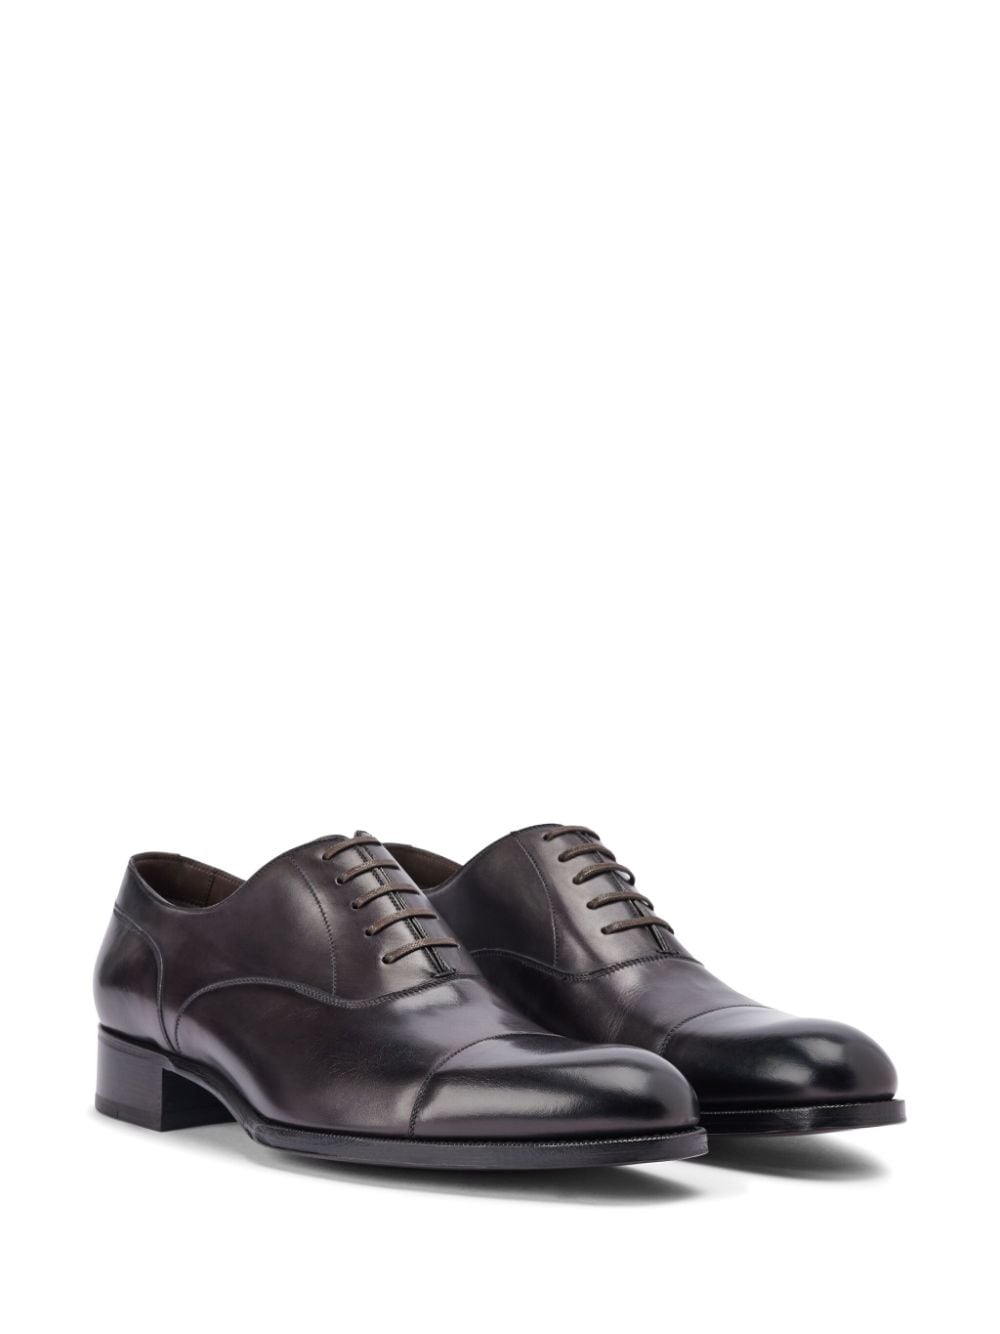 TOM FORD leather Oxford sneakers - Bruin